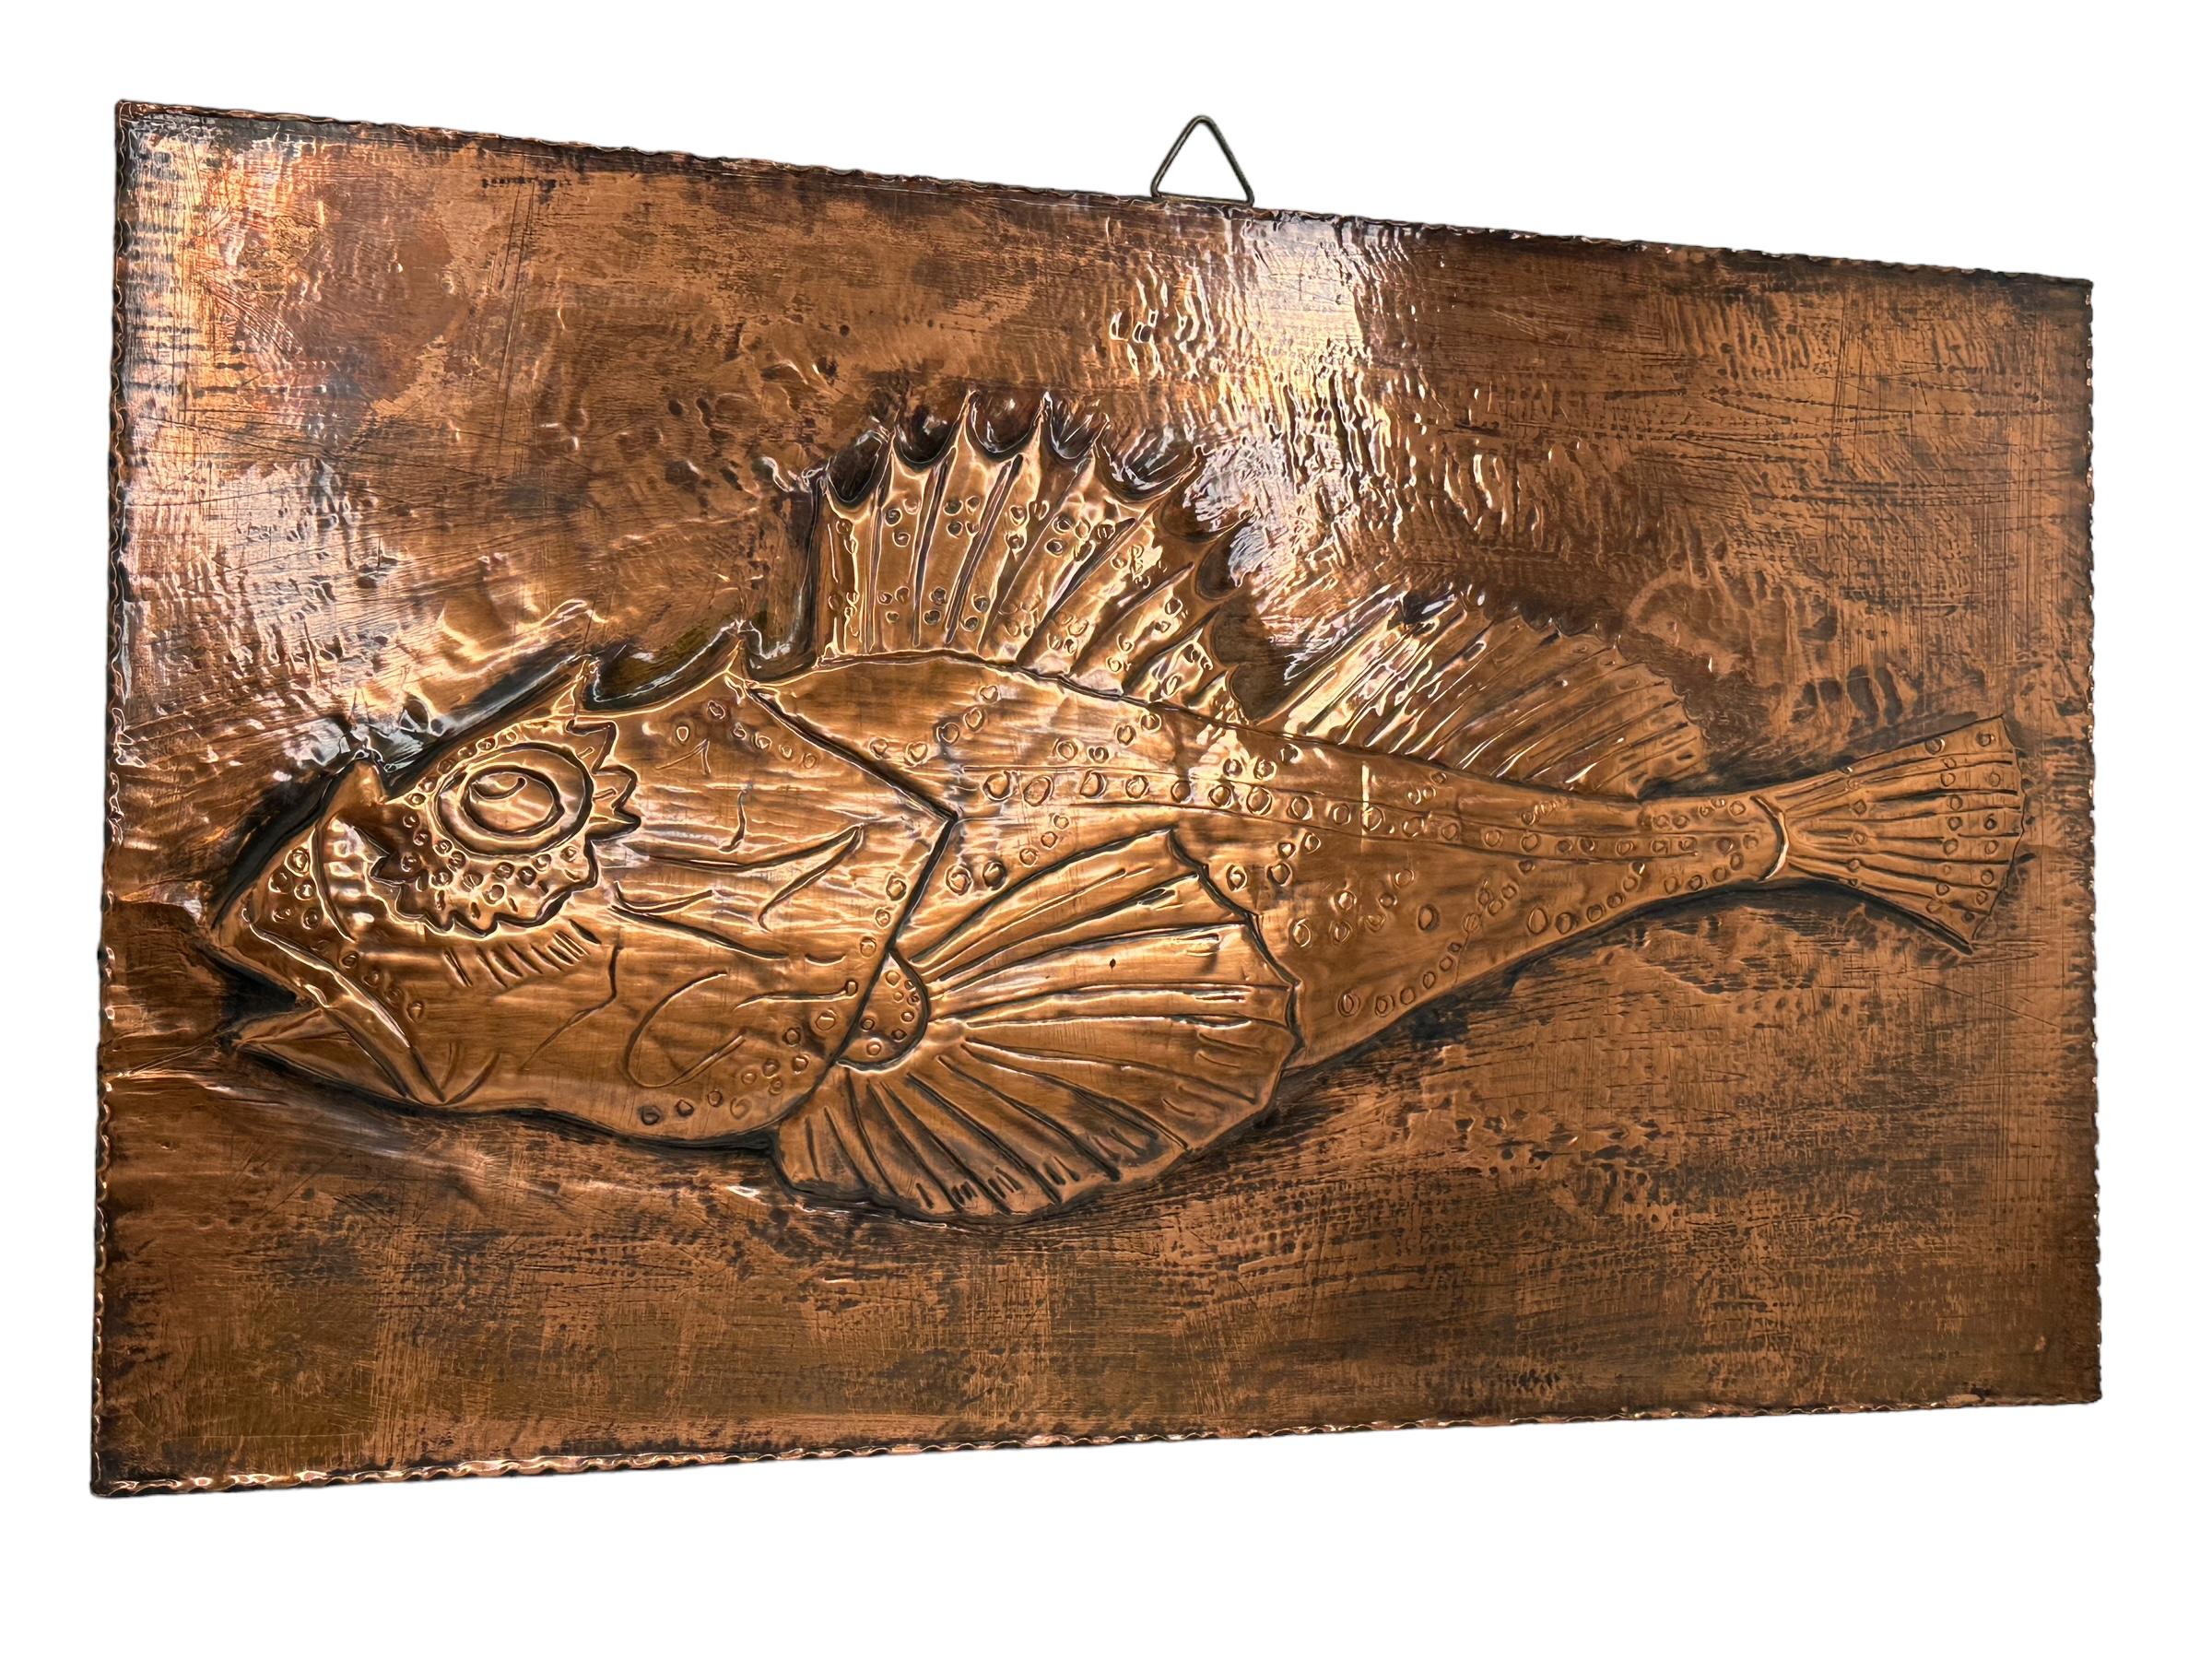 A beautiful, vintage copper Bone Fish themed wall decor picture. It would make a beautiful ornament at your wall. Vibrant colors and excellent craftsmanship. Also a great wall hanging for any office or waiting area. Made in the 1970s it displays the